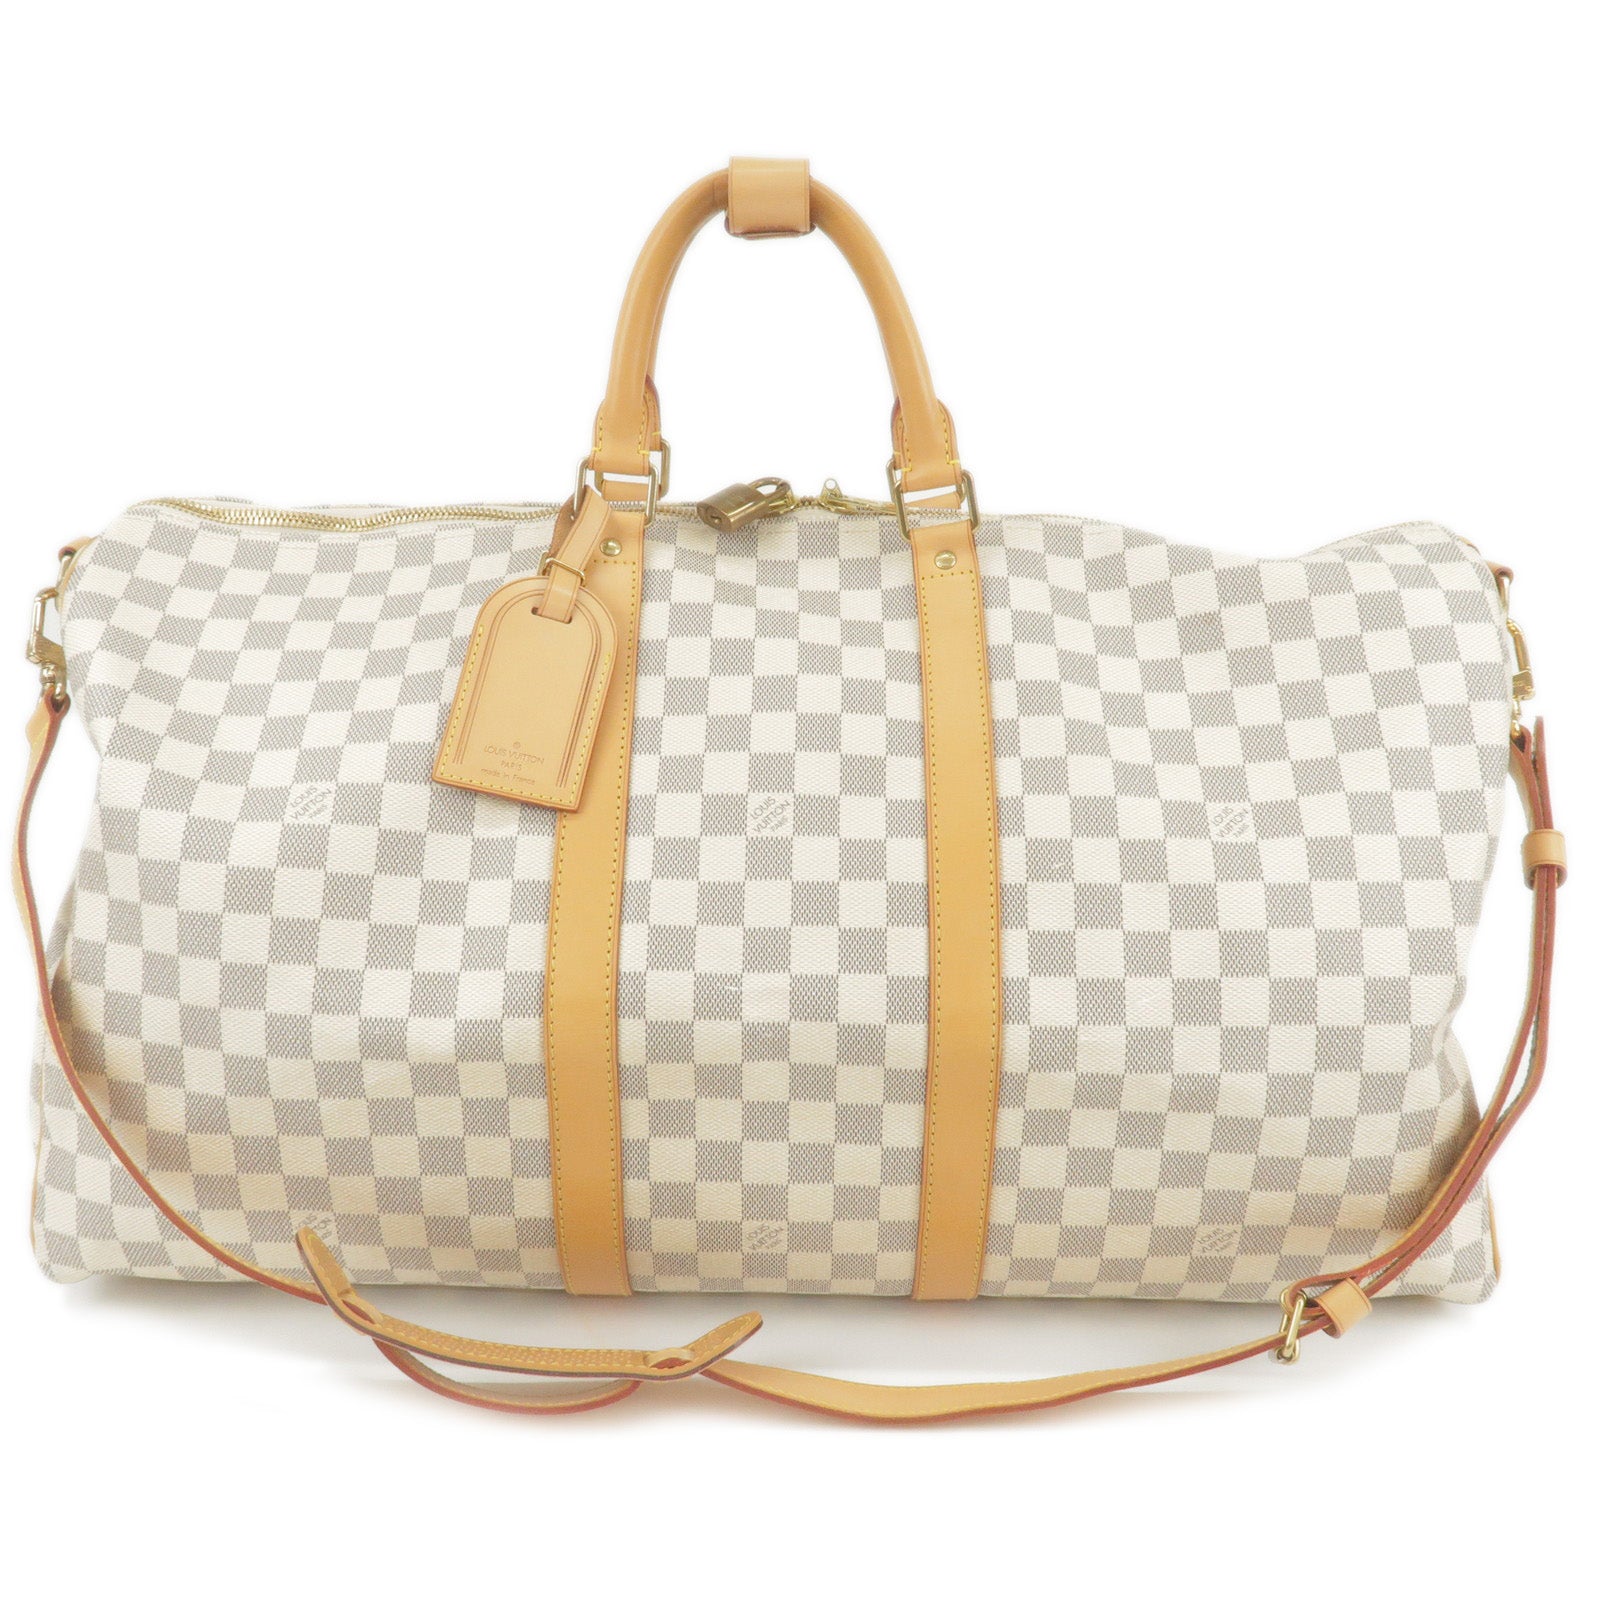 Louis Vuitton Damier Azur Keepall Bandouliere 55 Luggage at